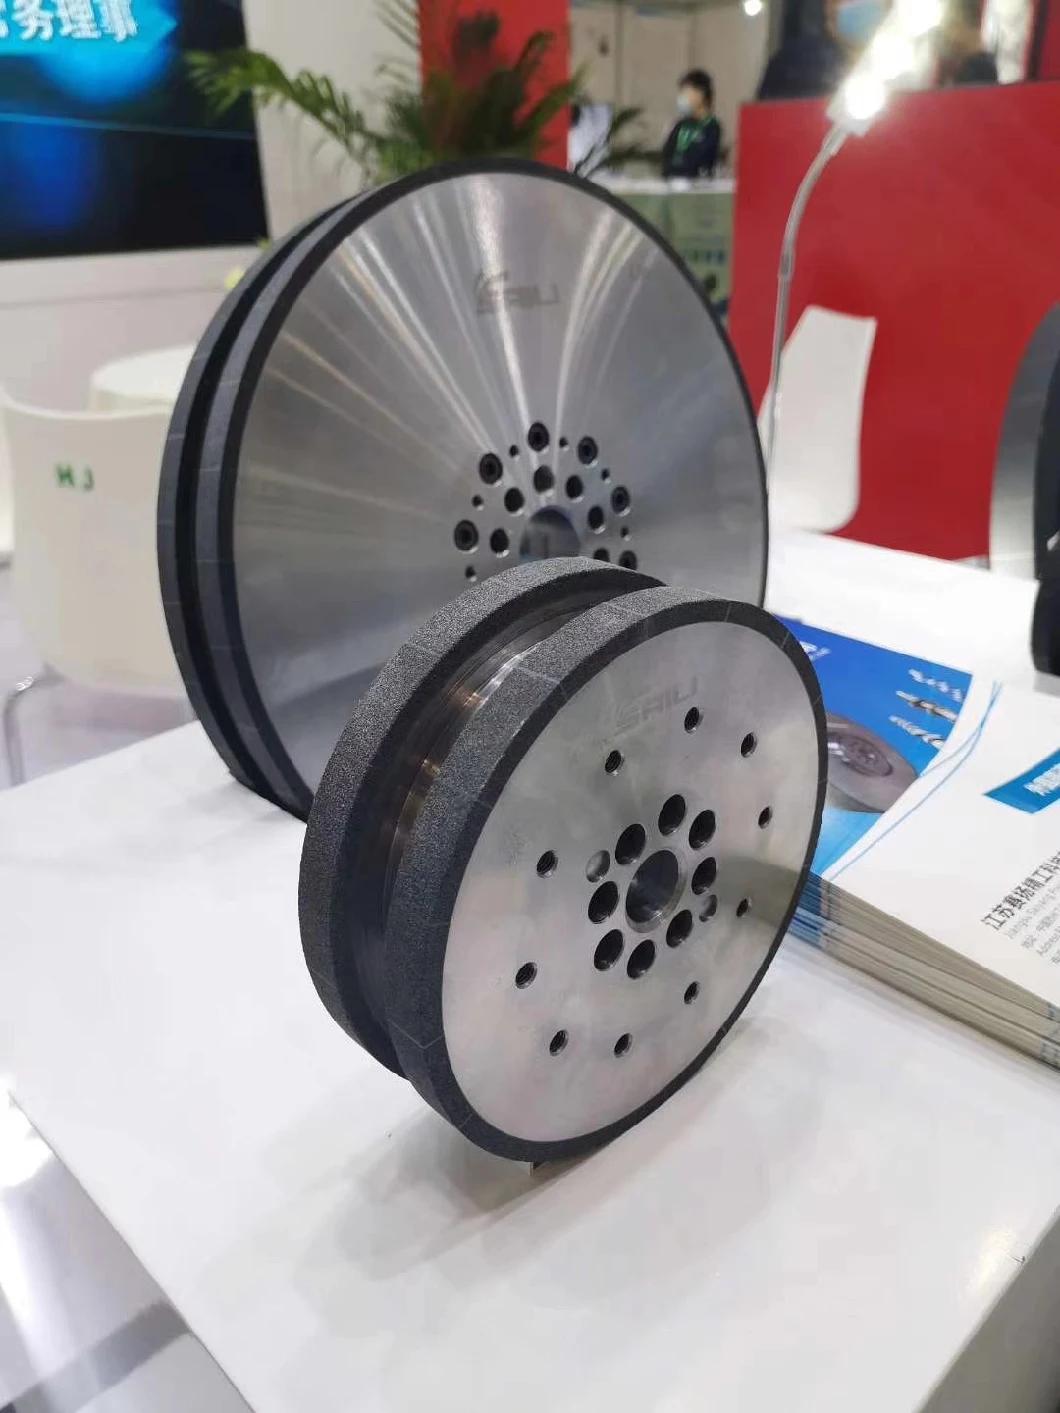 Resin, Hybrid and Metal Bond Superabrasive Wheels, Diamond and CBN Grinding Wheels 1A1 1A1r 14A1 3A1 Straight Wheels